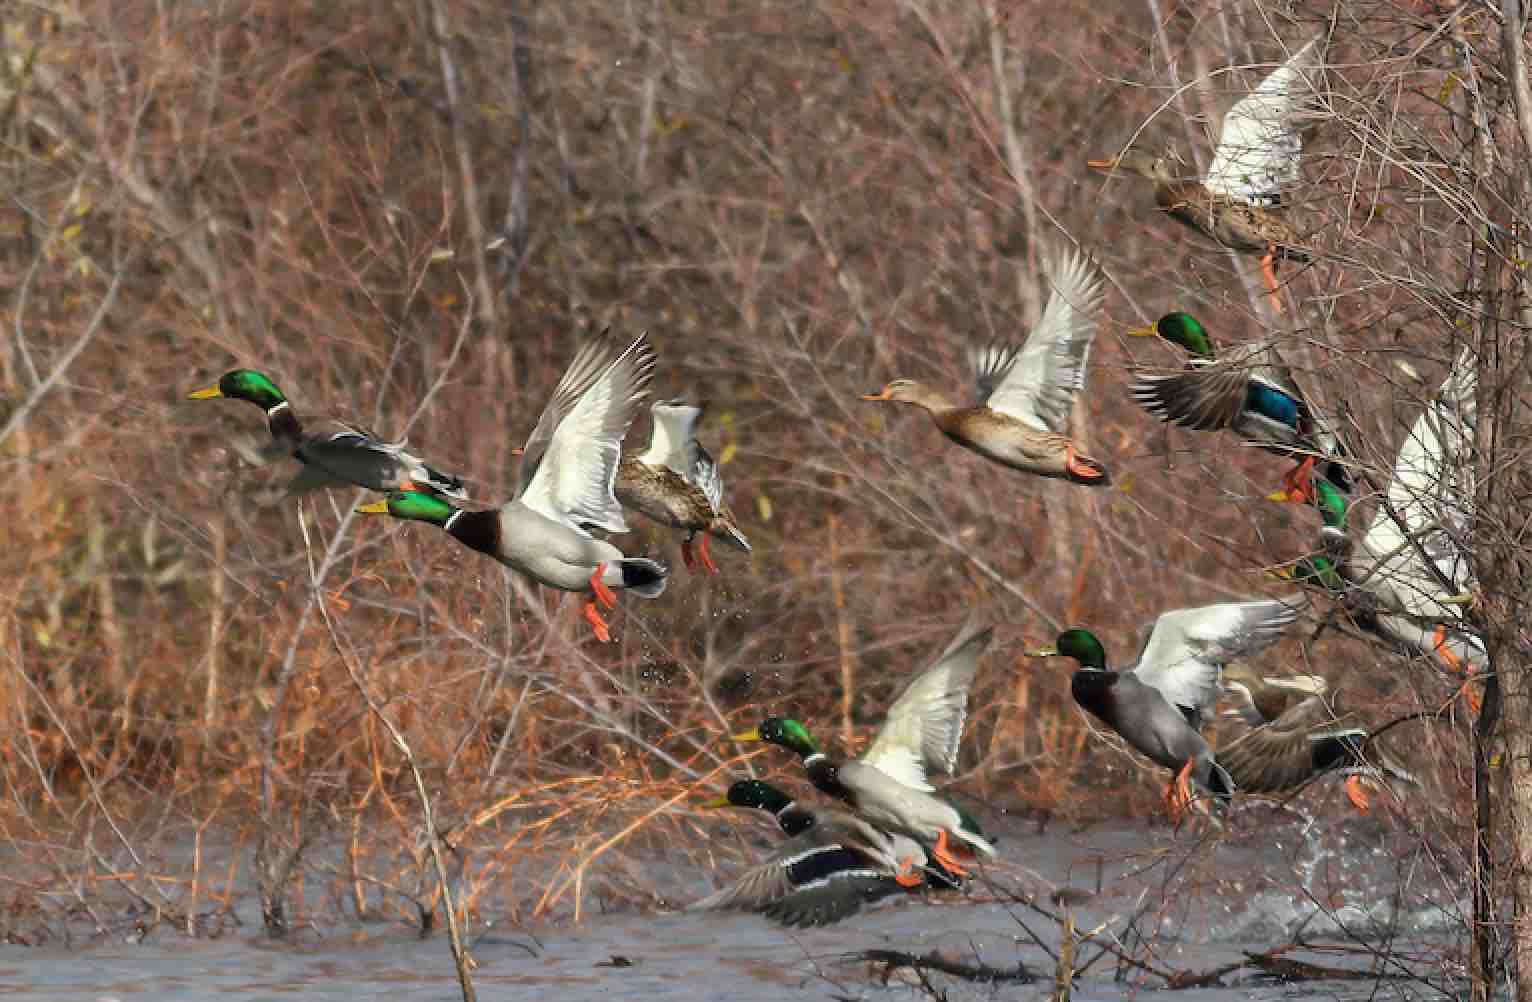 Waterfowl Population Survey Grounded By COVID-19